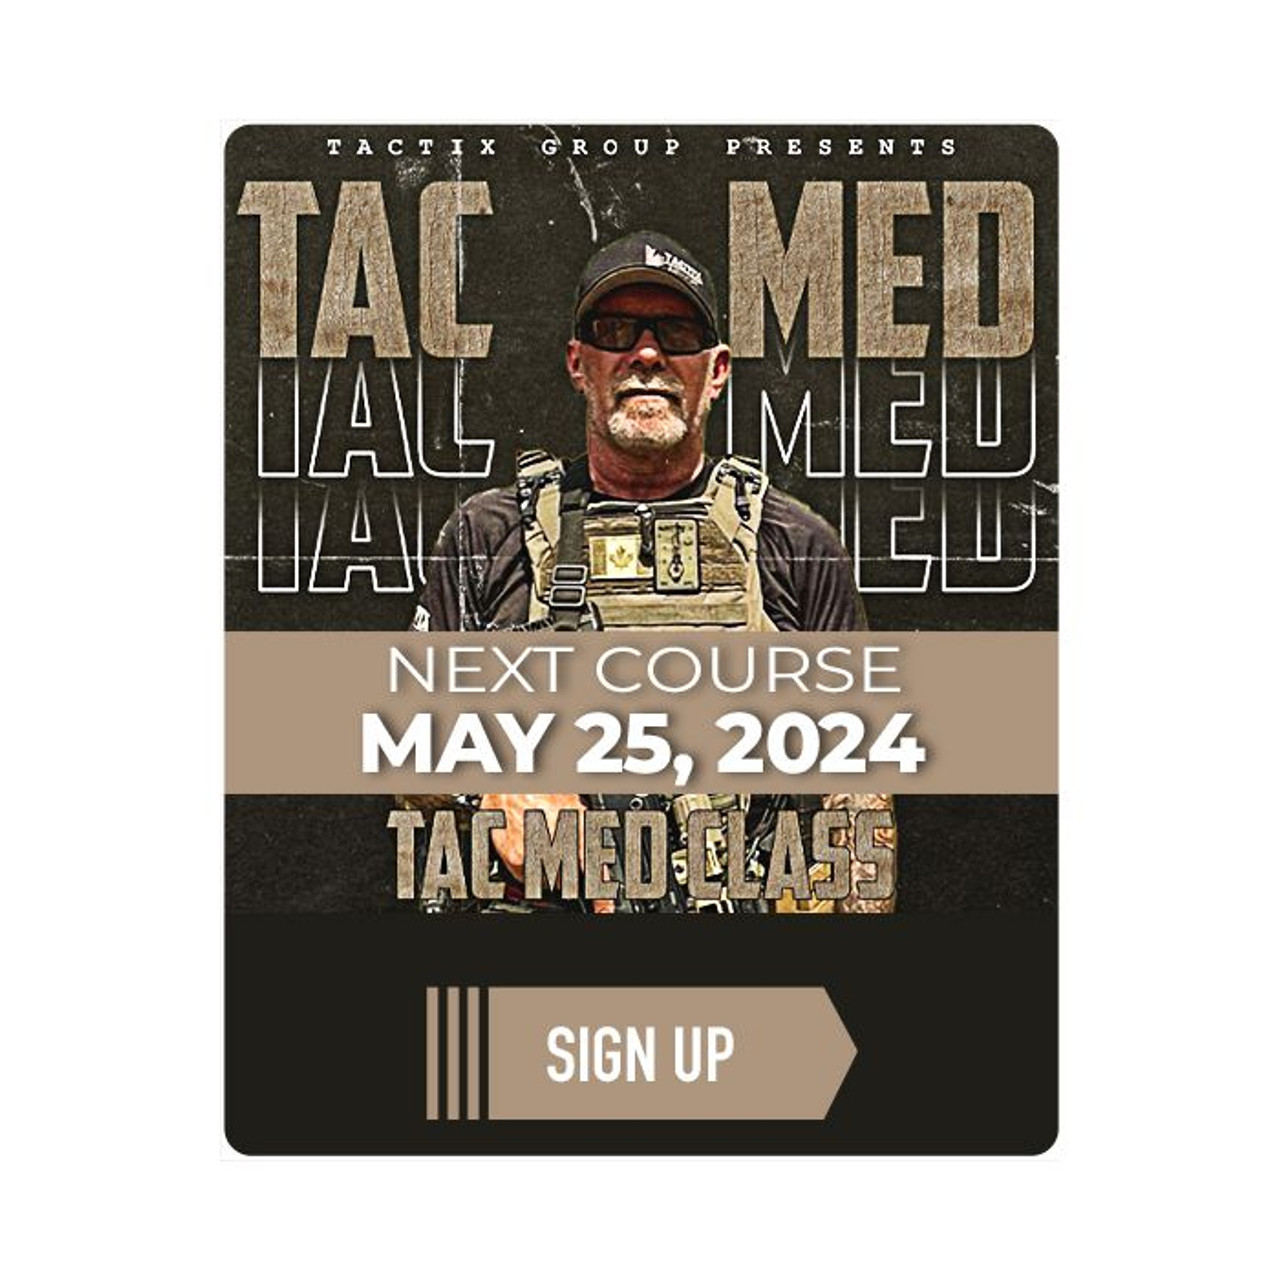 TACTIX Training Group - Basic Tactical Medicine (TacMed) Course - May 25, 2024